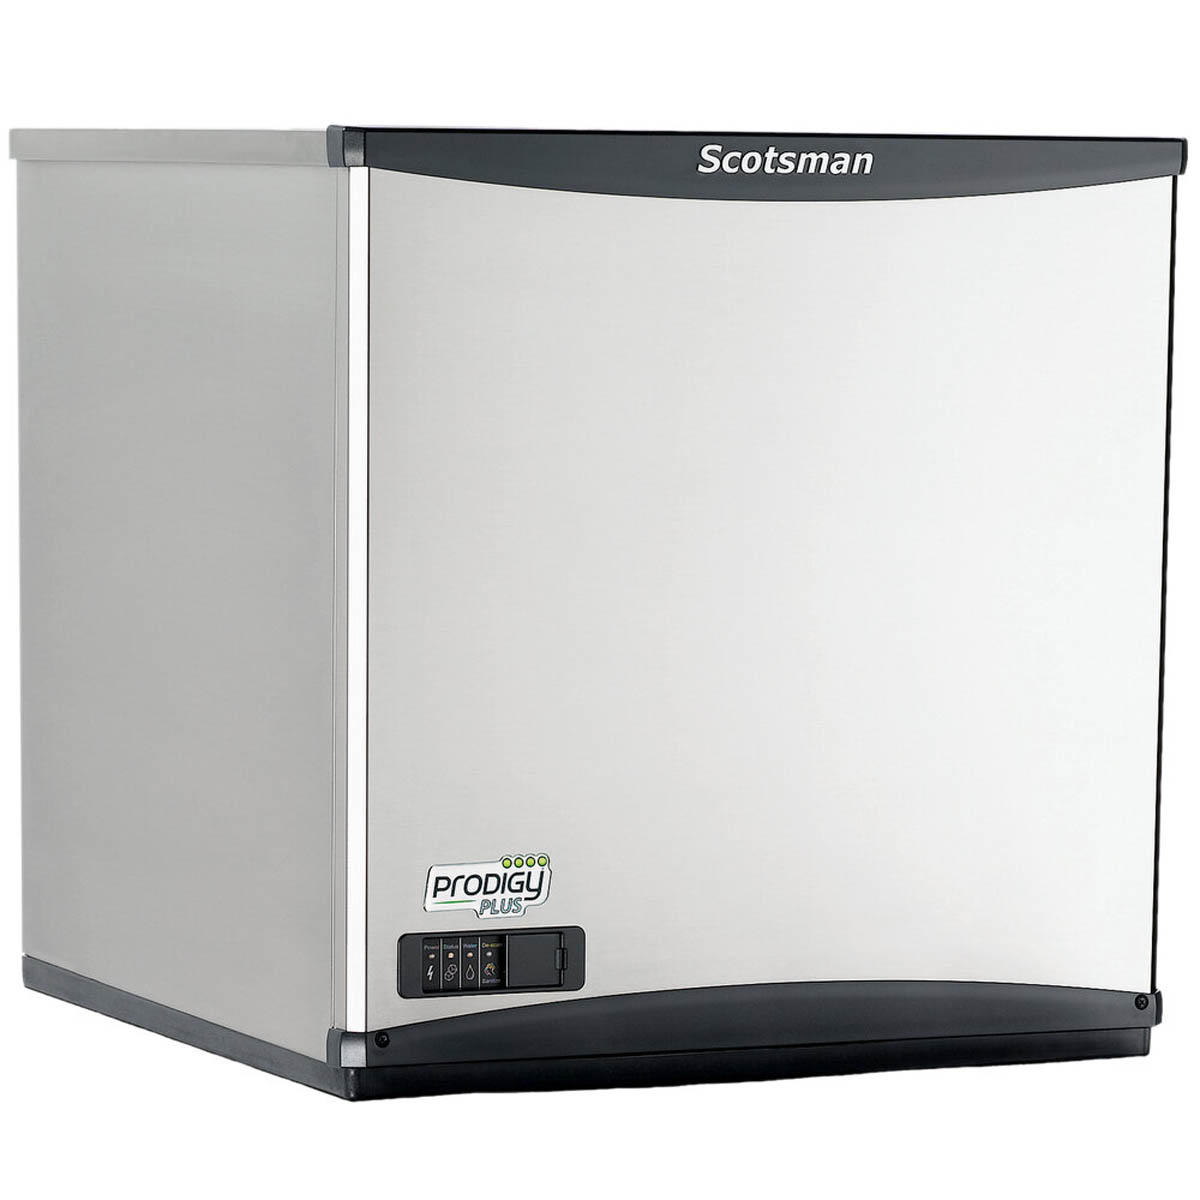 Scotsman FS0822W-1 22“ Water-Cooled Flake-Style Ice Maker, 775 lbs/Day